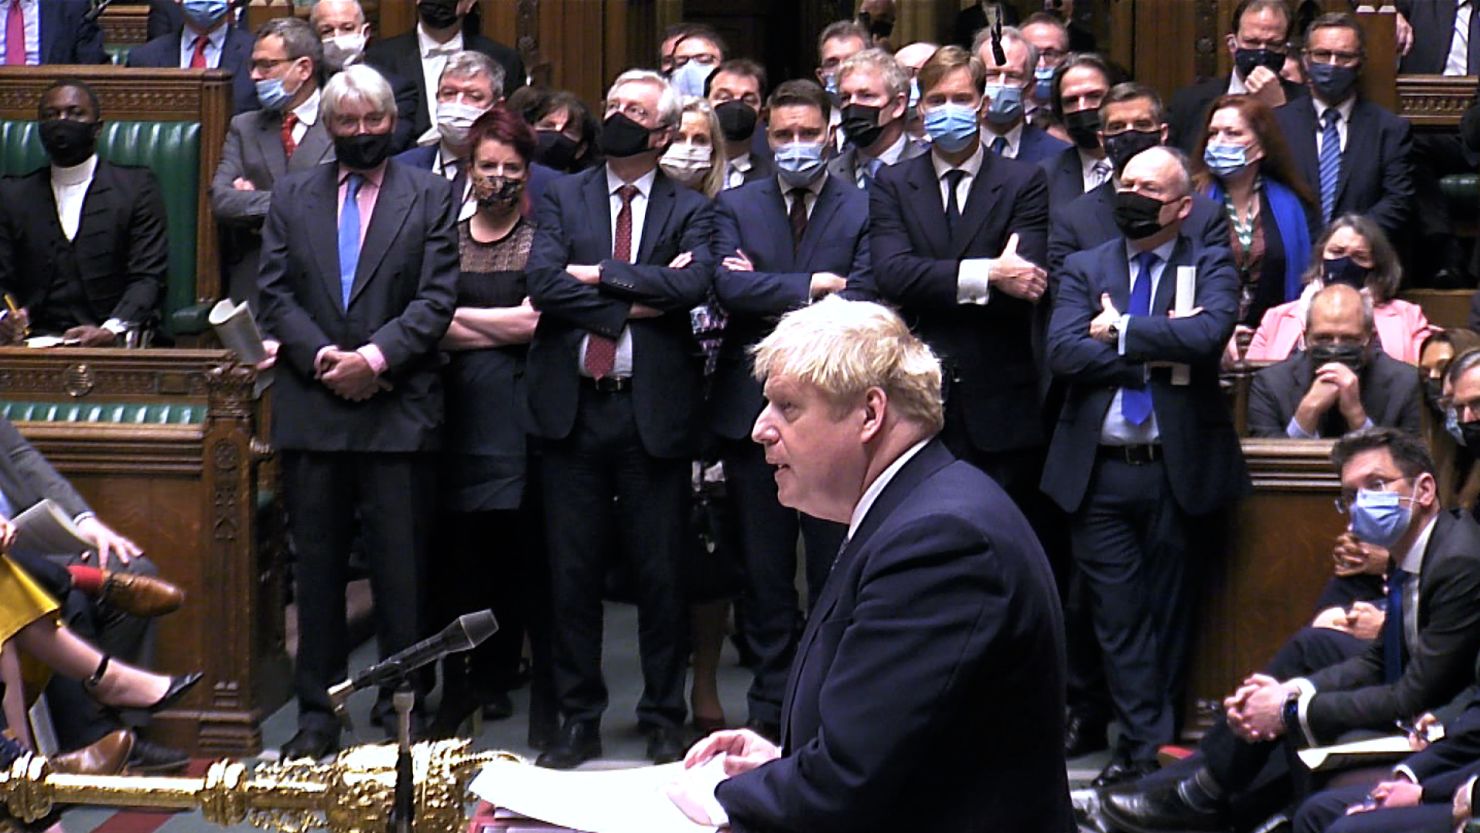 British Prime Minister Boris Johnson faced tough questions from lawmakers in UK Parliament earlier this month as outrage mounted over a "bring your own booze" event held at Downing Street during the height of the UK's first Covid-19 lockdown.